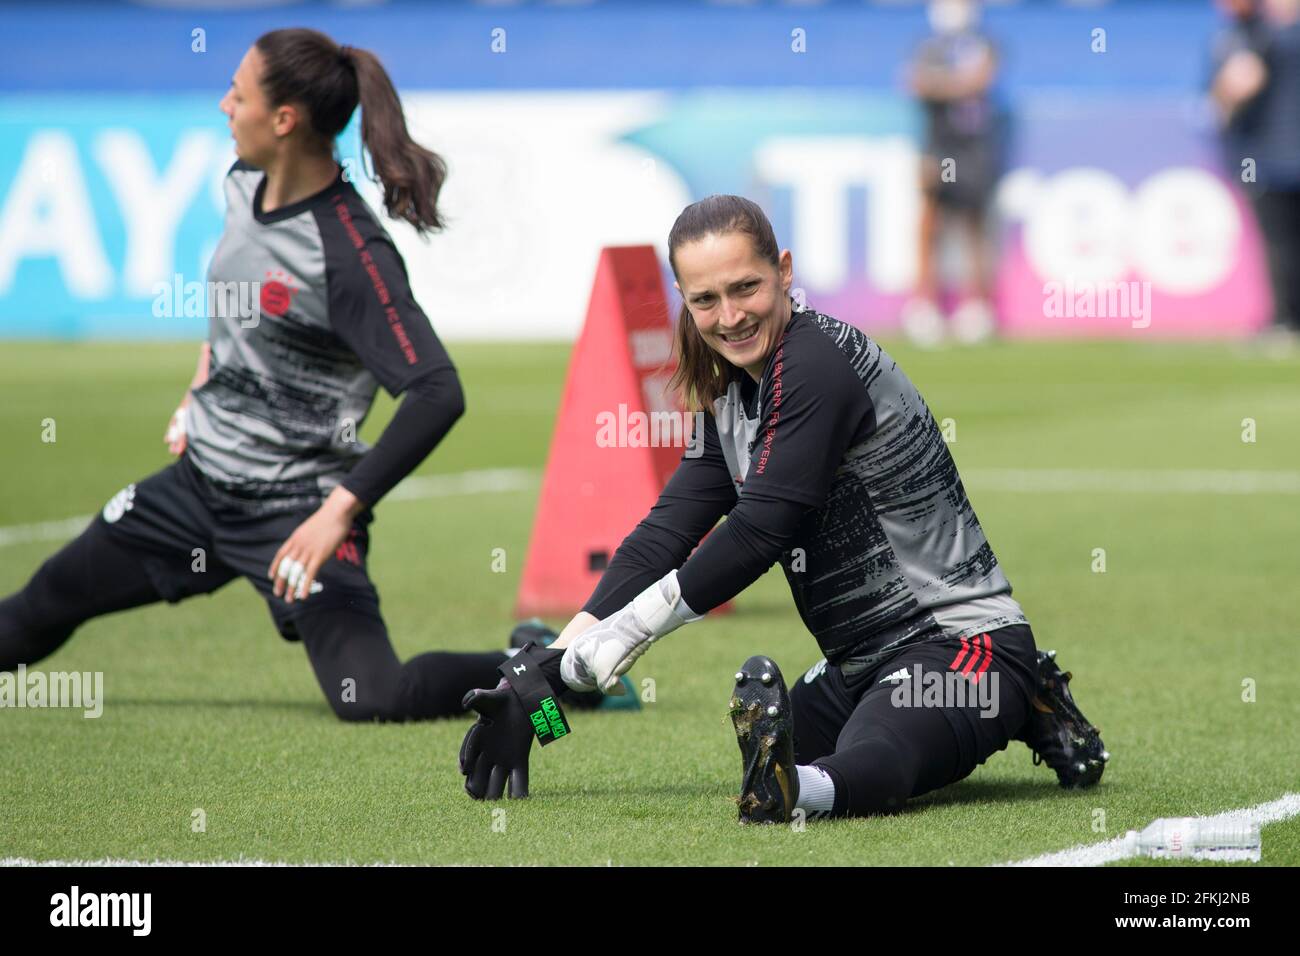 LONDON, UK. MAY 2ND :  Bayern Munich squad warms up during the 2020-21 UEFA Women’s Champions League fixture between Chelsea FC and Bayern Munich at Kingsmeadow. Credit: Federico Guerra Morán/Alamy Live News Stock Photo